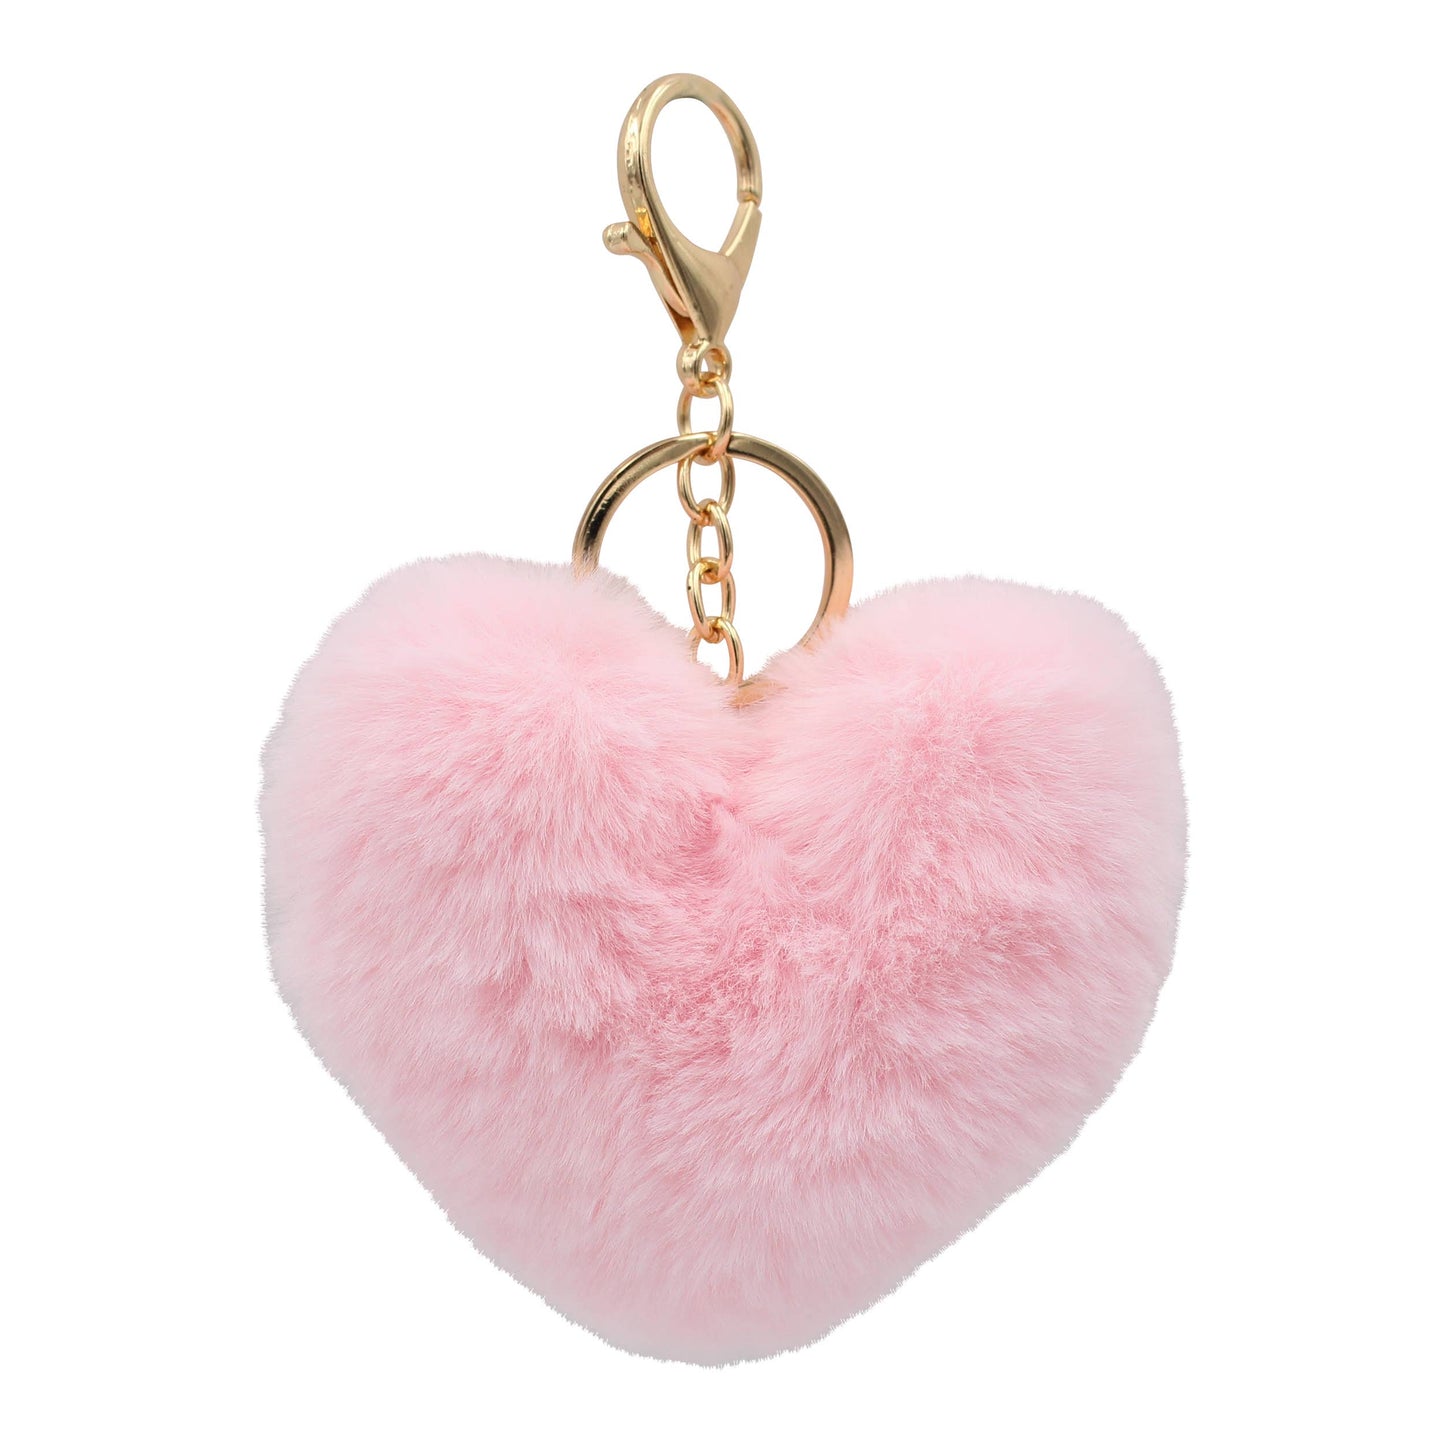 Image of Real Sic Pink Pom Pom Fuzzy  Heart Key Chain for girl's bag and purse